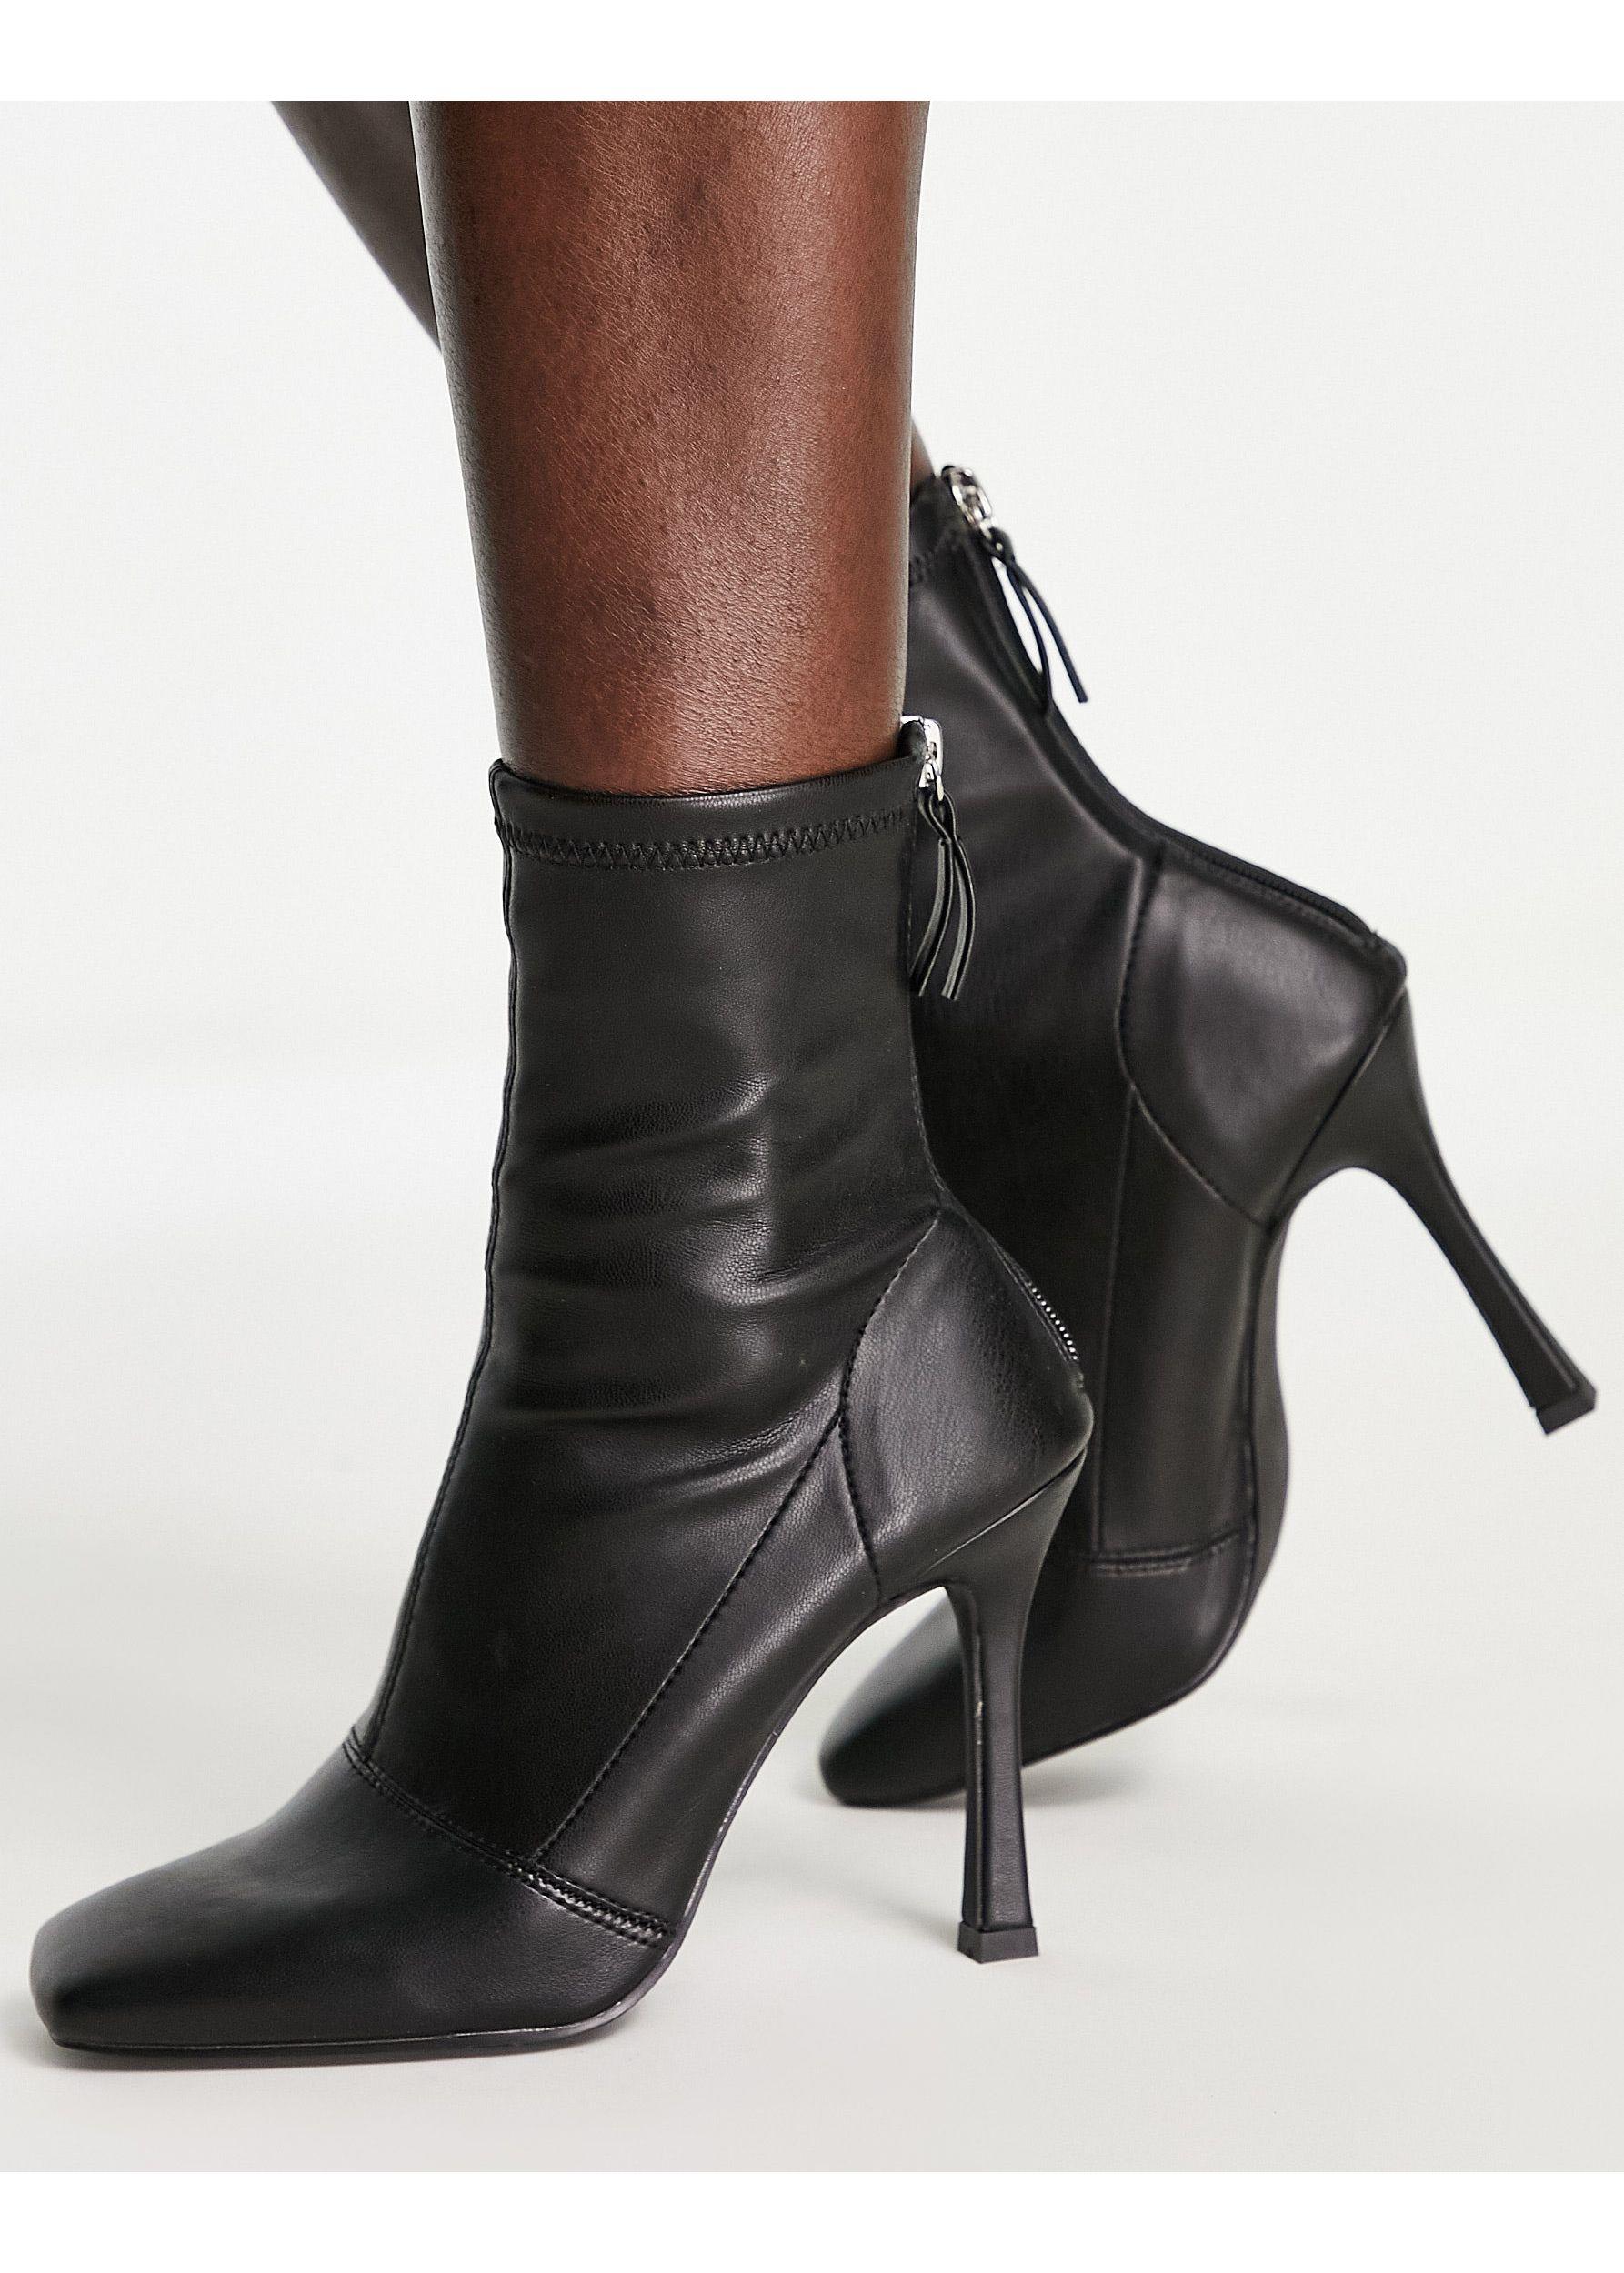 Missguided Heeled Ankle Boots With Square Toe in Black | Lyst